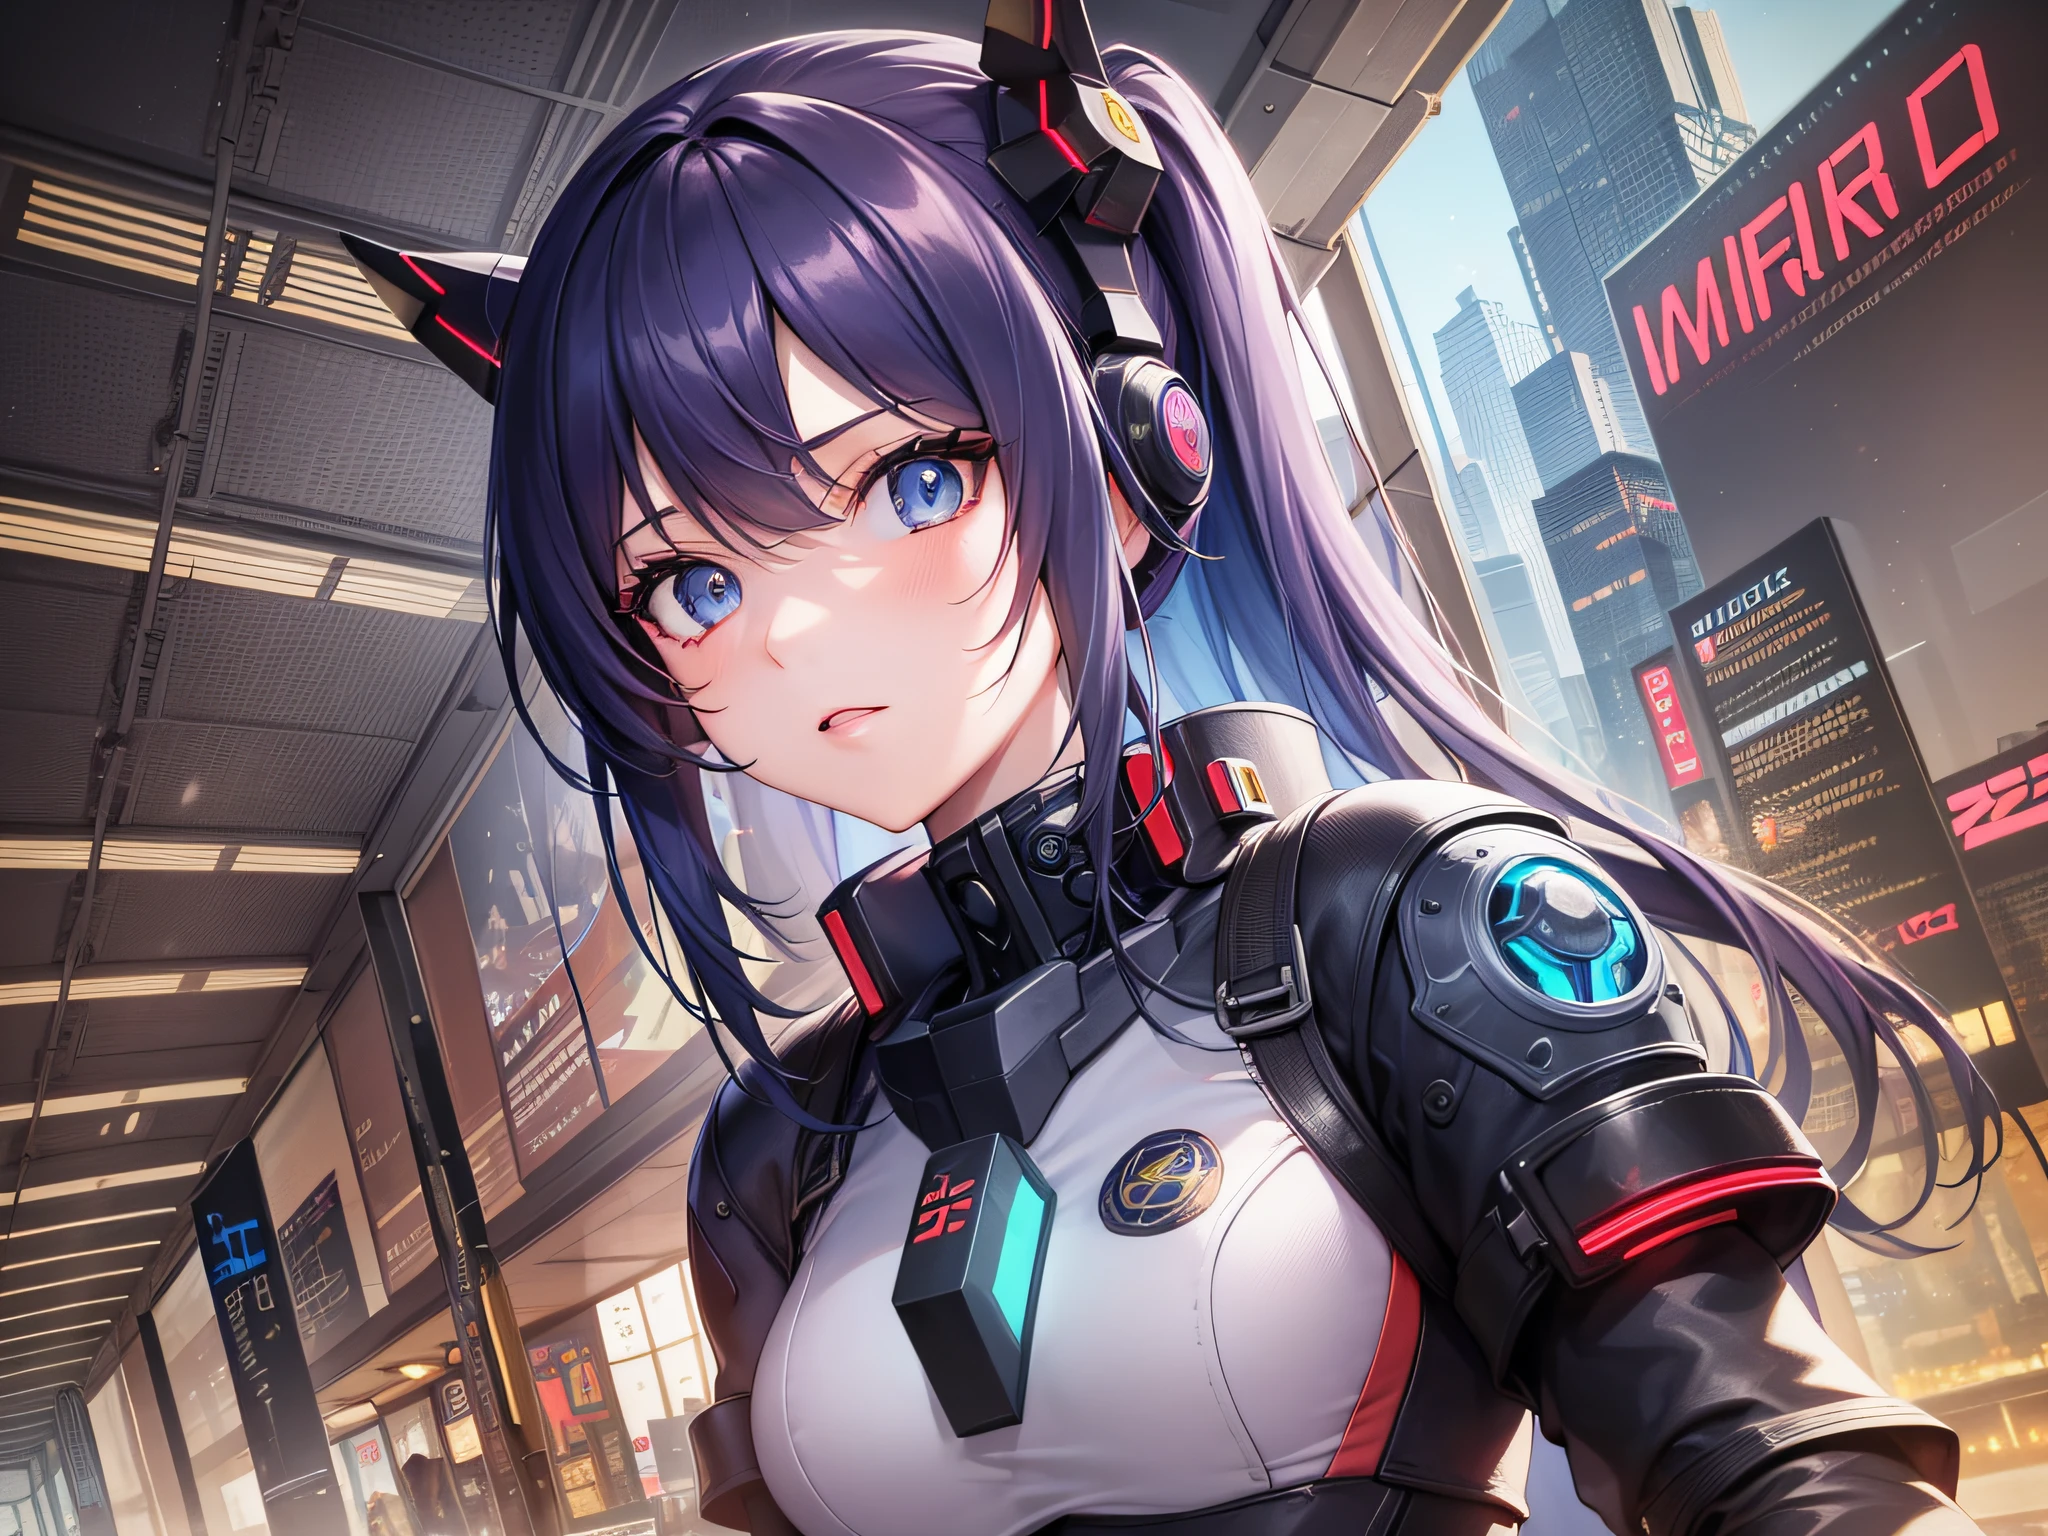 Anime girl in red and blue suit and gun, portrait anime space cadet girl, Portrait of a female anime hero, Cyberpunk anime girl mecha, Girl in Mecha Cyber Armor, ig model | ArtGerm, female cyberpunk anime girl, android heroine, Cyberpunk Anime Girl, Digital Cyberpunk Anime Art, very detailed Artgerm, Artgerm jsc